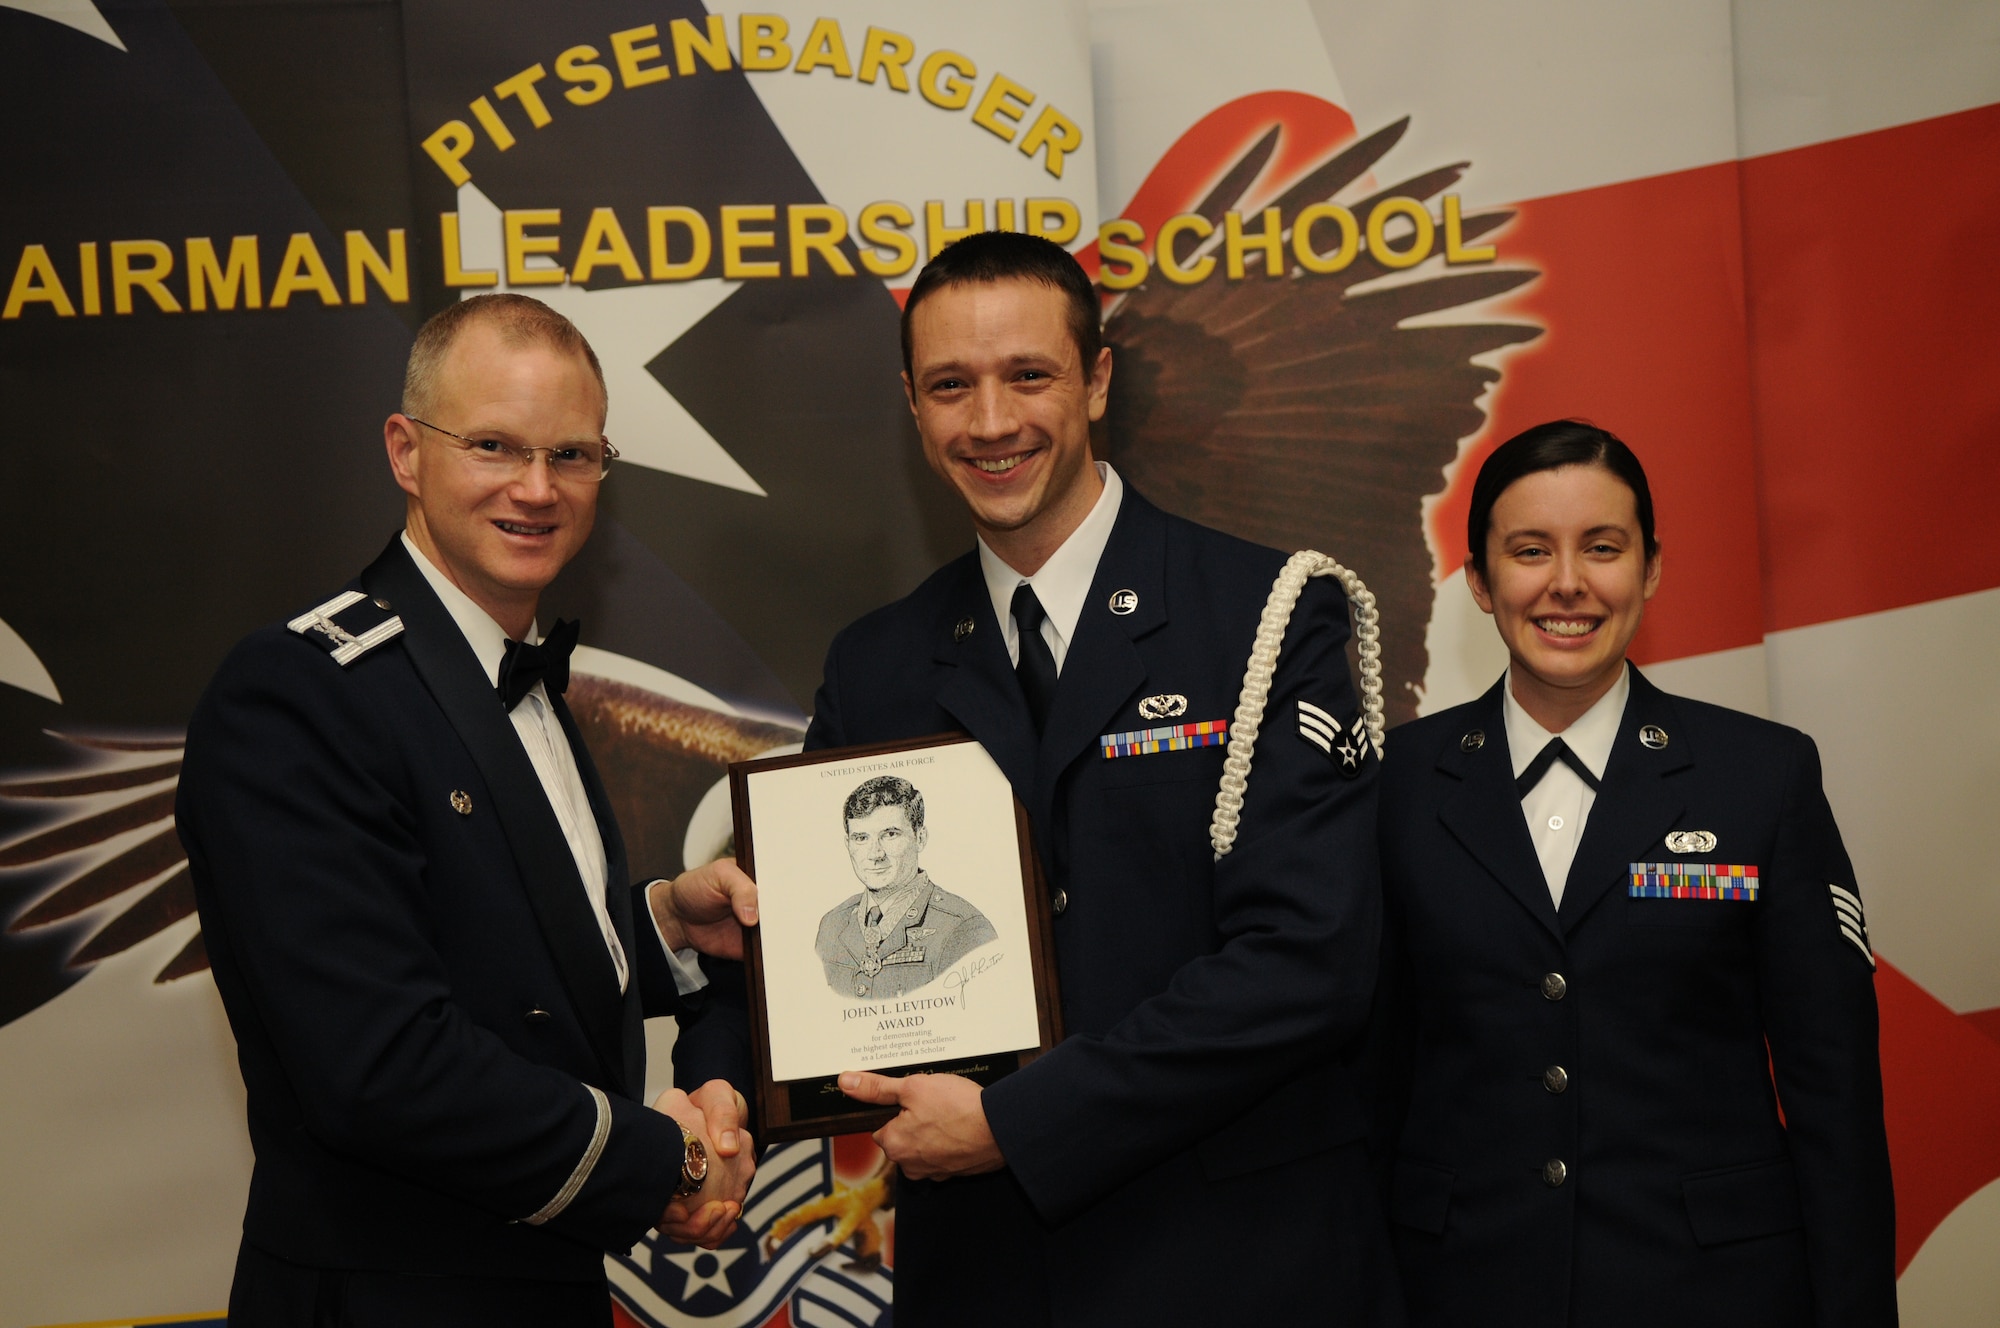 SPANGDAHLEM AIR BASE, Germany -- Senior Airman Kevin Wannemacher, 52nd Civil Engineer Squadron, accepts the John L. Levitow award from Col. Christopher Weggeman, 52nd Fighter Wing commander and Staff Sgt. Michelle Godlstrom, previous John L. Levitow award recipient, during the Pitsenbarger Airman Leadership School Class 11-C graduation at Club Eifel Feb. 16. The John L. Levitow award is the highest award an Airman can receive upon completion of ALS. (U.S. Air Force photo/Airman 1st Class Matthew B. Fredericks)